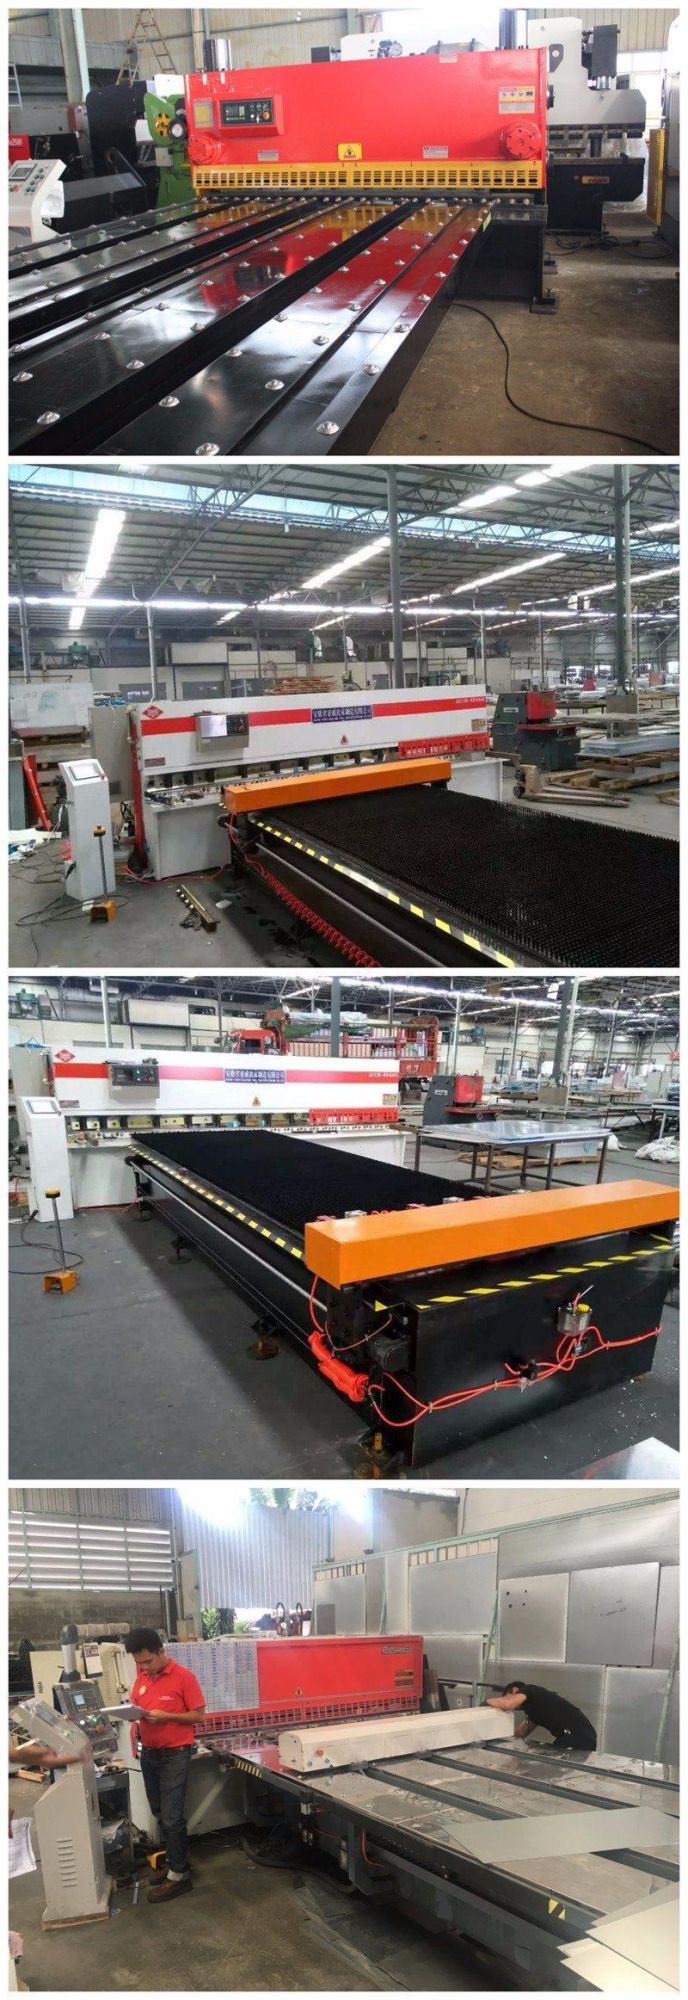 Top Quality Carbon Steel Guillotine Cutting Machine, QC11y Hydraulic Automatic Plate Shears Machine